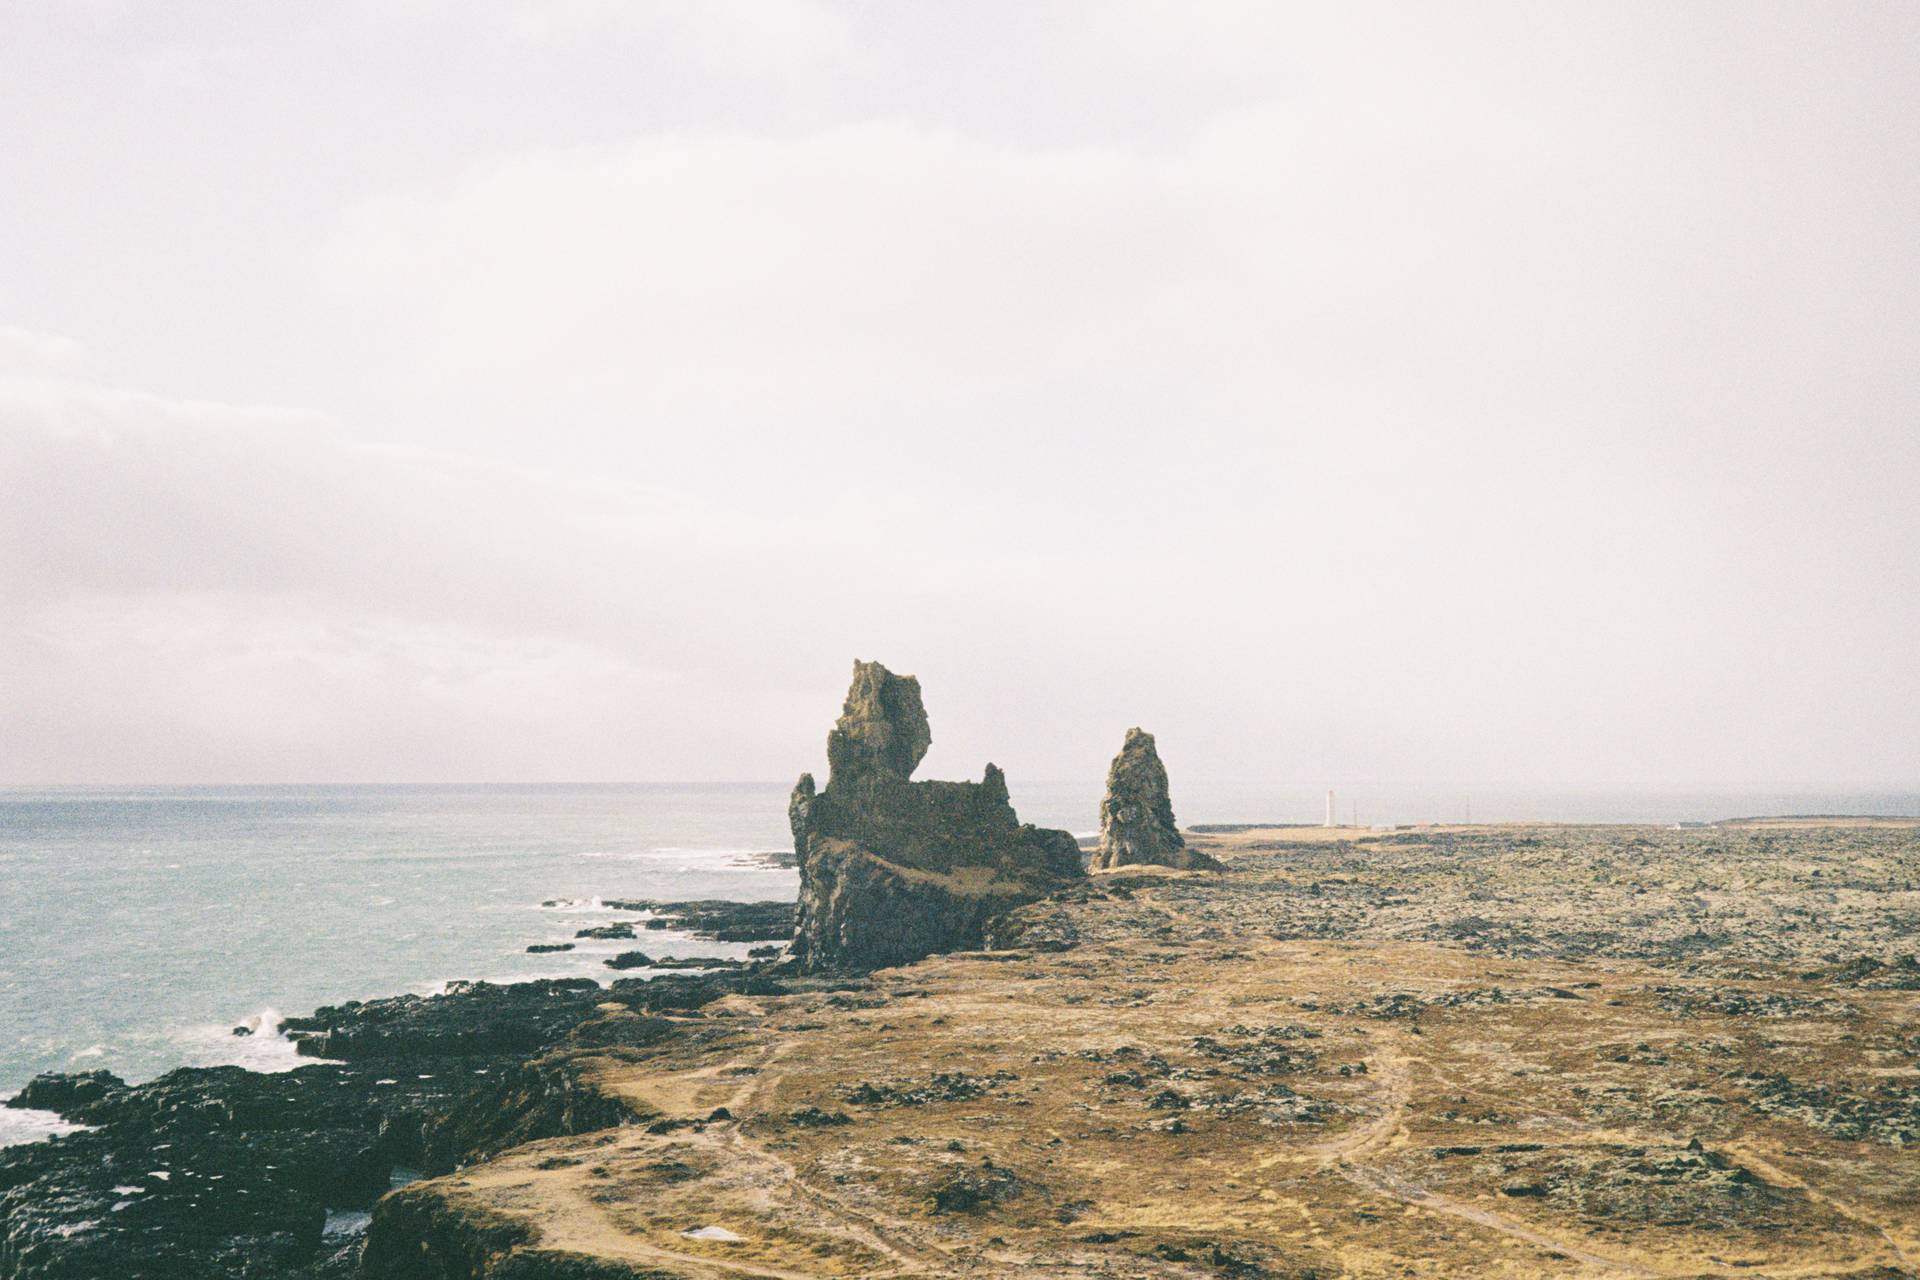 A photograph of two rocks (known as trolls) on a cliff by the shore